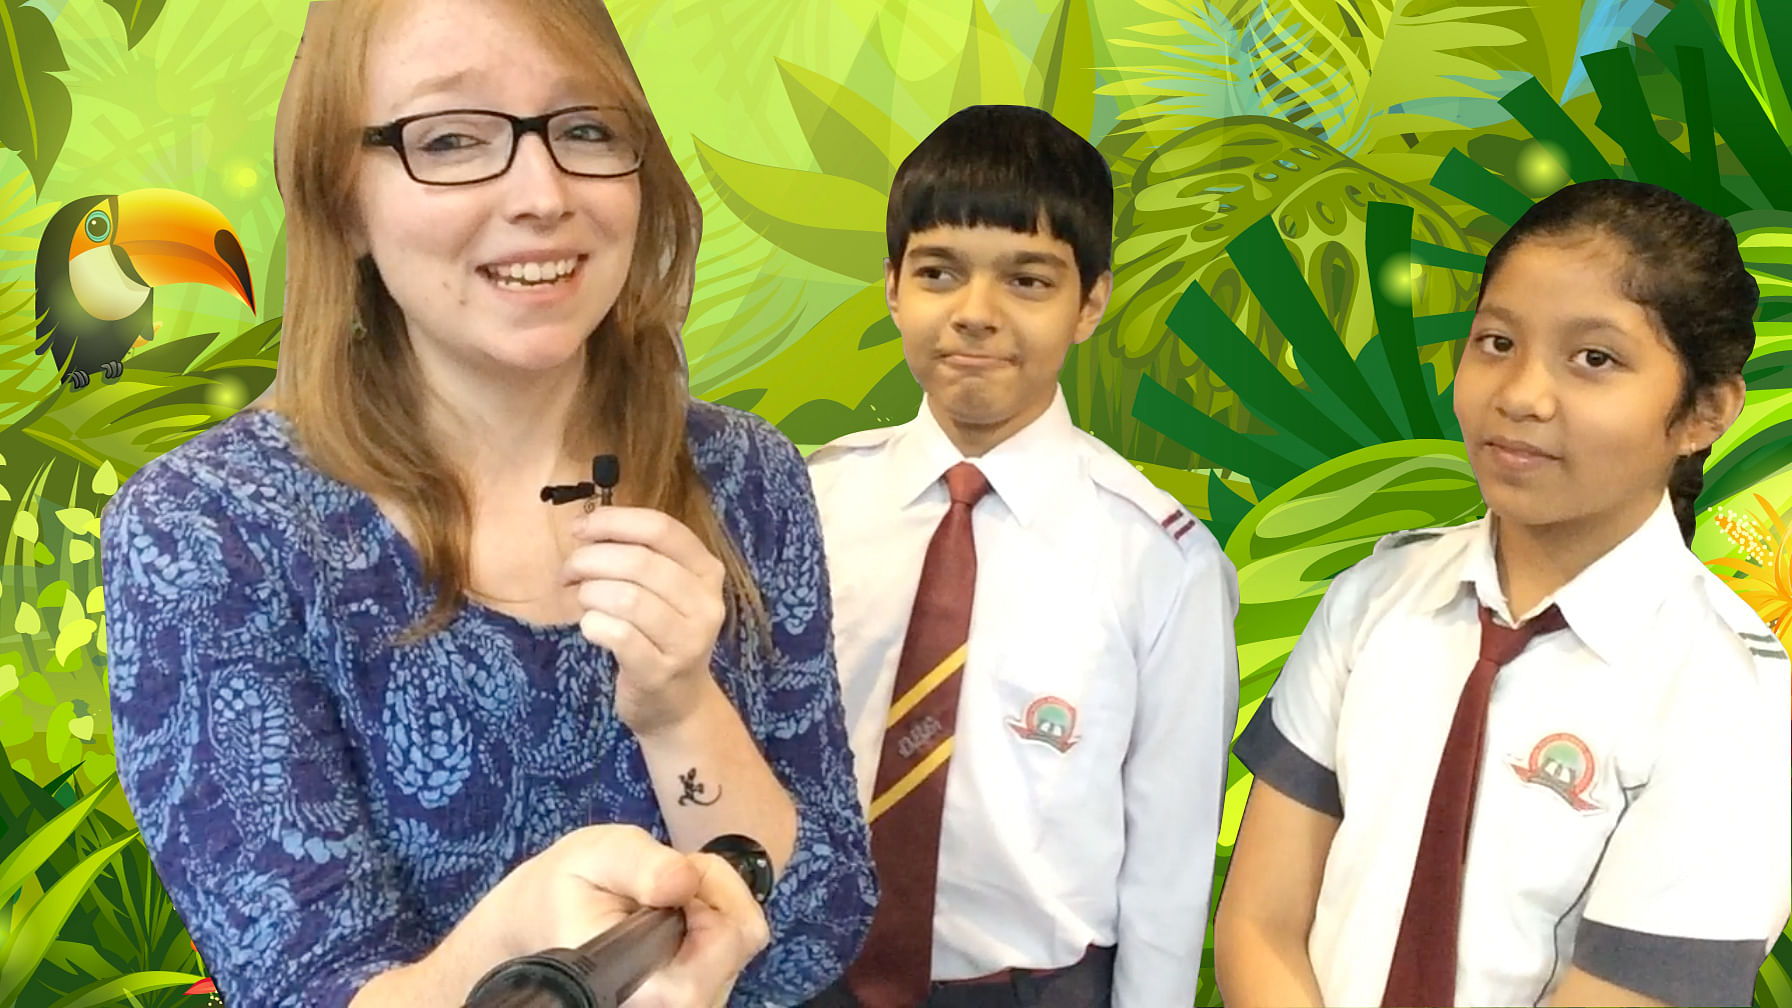 <b>The Quint</b>’s environment reporter interviews some really smart kids. (Image: altered by <b>The Quint</b>)